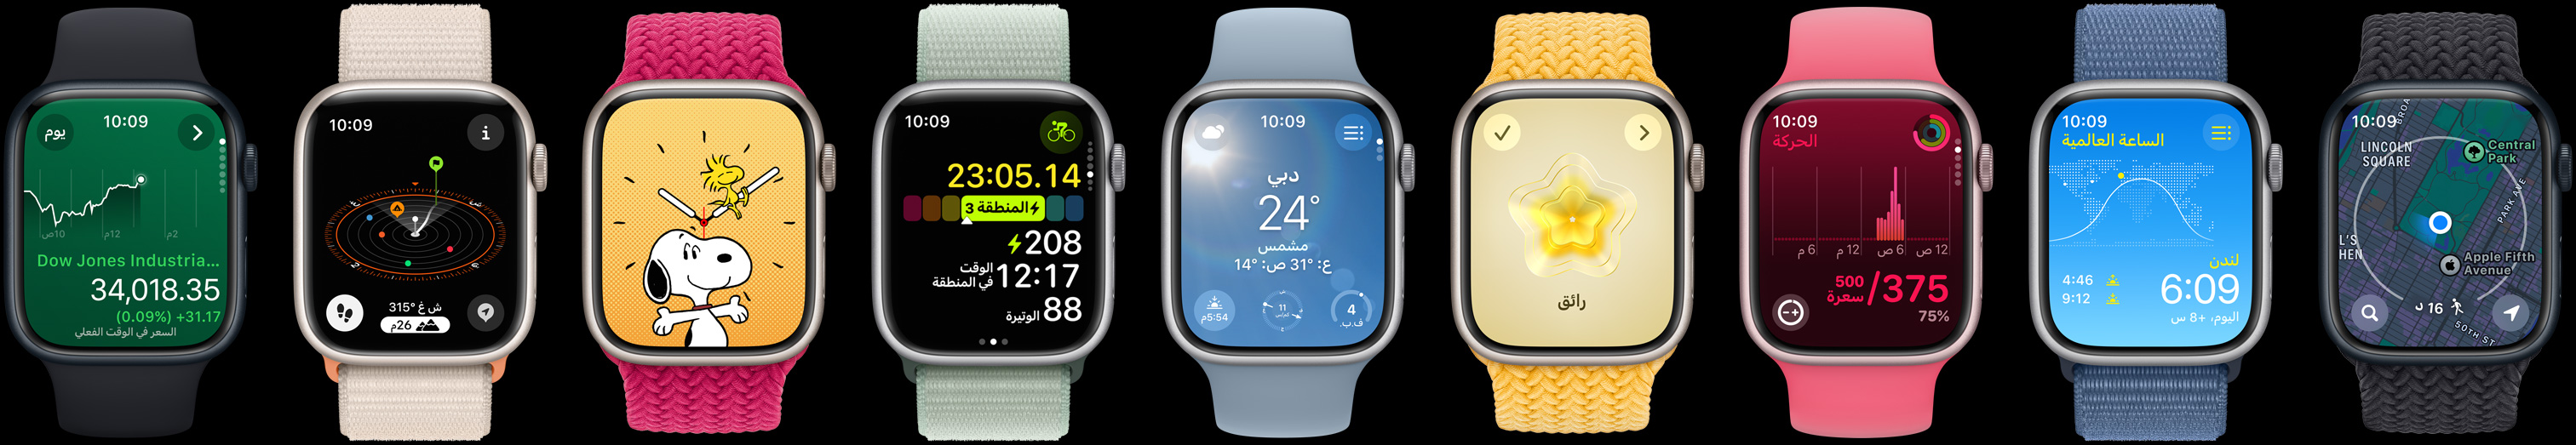 5 watch faces move left to right demonstrating how much more information can fit on each display.